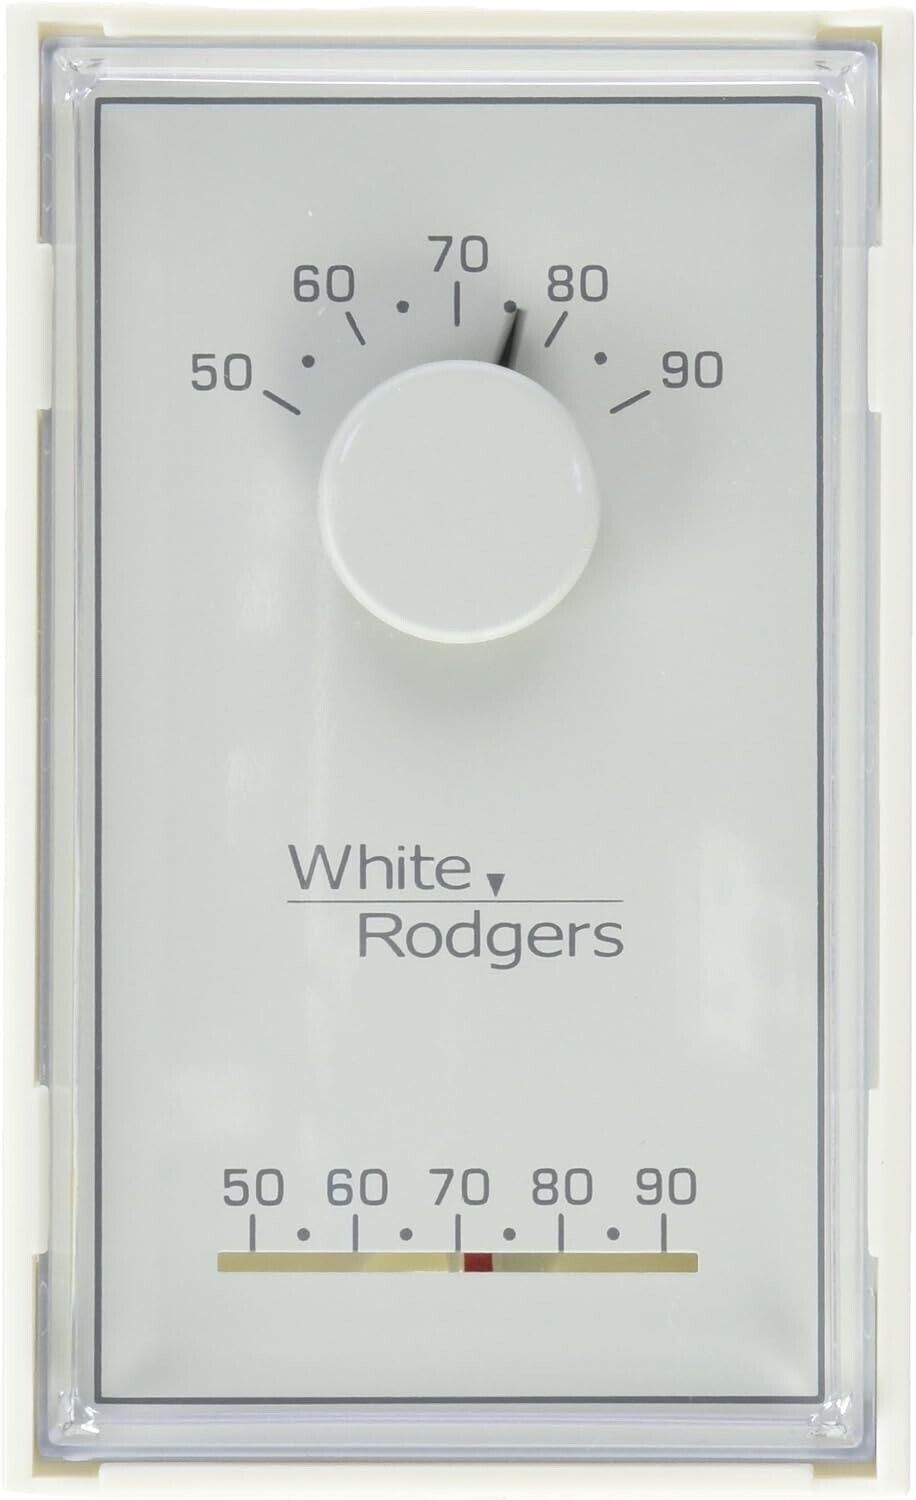 Emerson White-Rodgers 1E56N-444 Low V Mechanical Thermostat, 50-90F, White